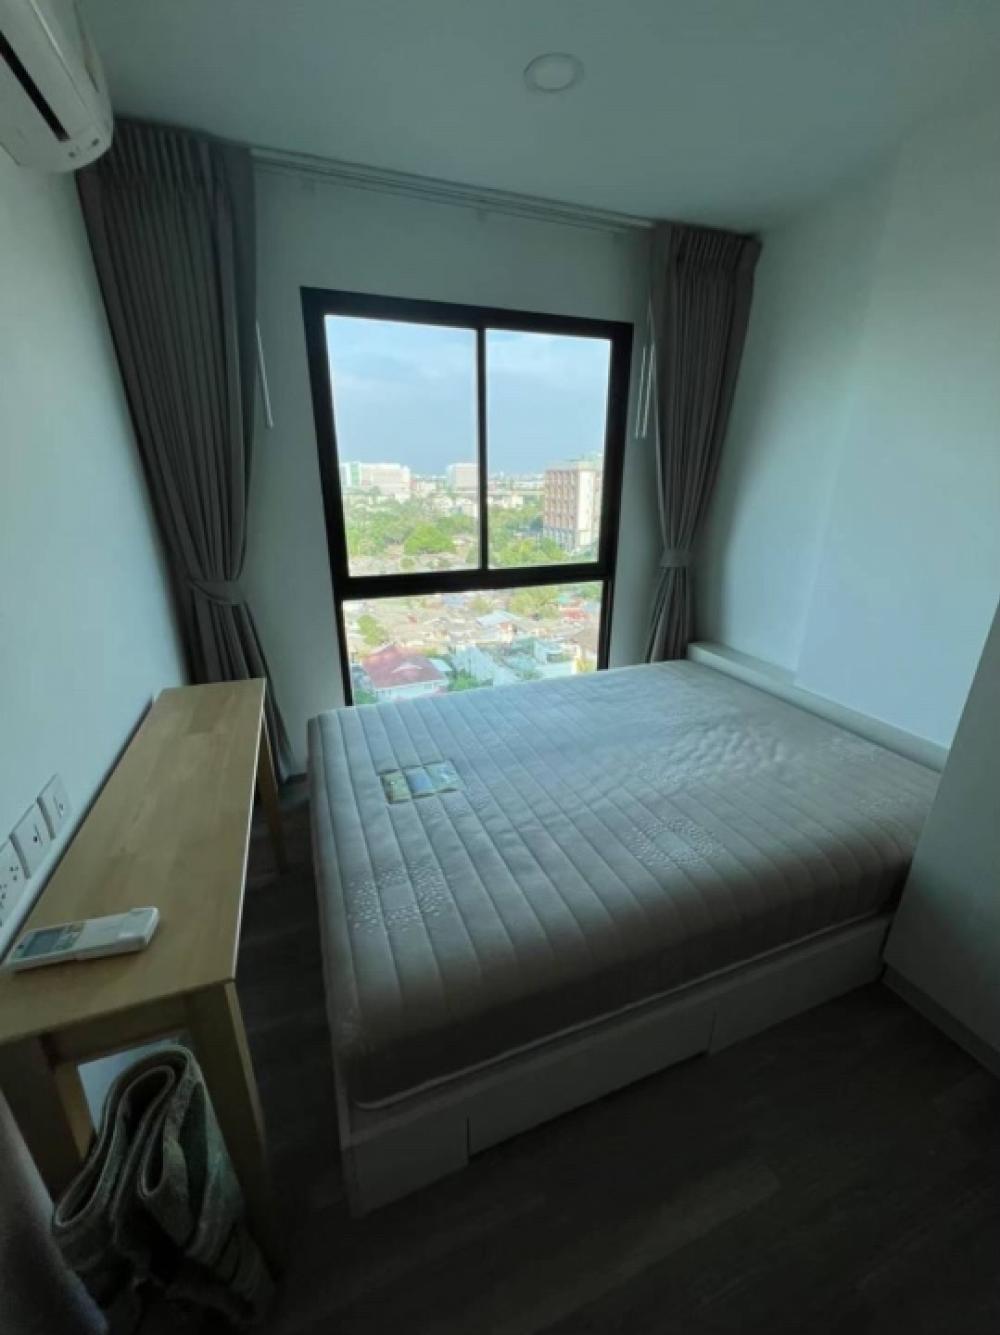 For RentCondoKasetsart, Ratchayothin : 🔥For rent🔥Kensington Kaset Campus, 2 bedrooms, 1 bathroom #Condo with leaks, Kasetsart University, 2-3 people comfortably stay♥️ Available 1 May 2024 ✅Line : @livingperfect